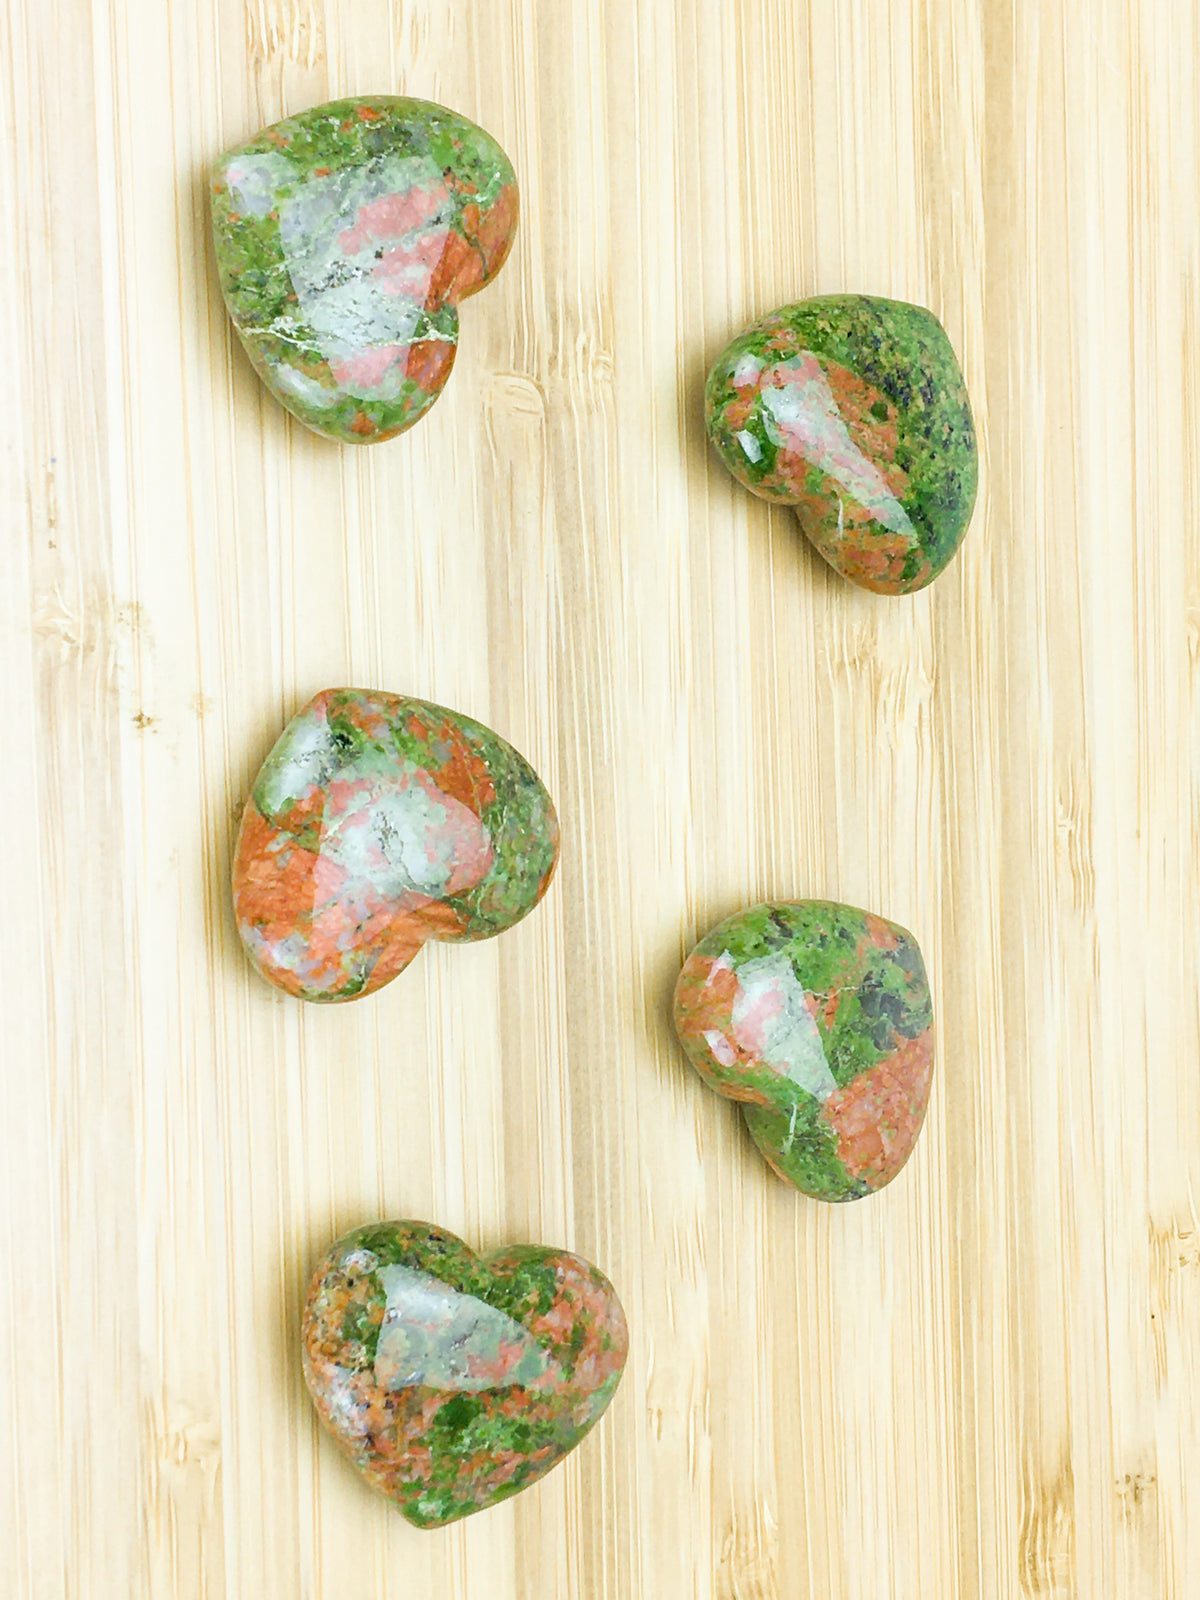 Five unakite hearts on grsinedcwood. The unakite consists of green epidote with crystals of orthoclase 